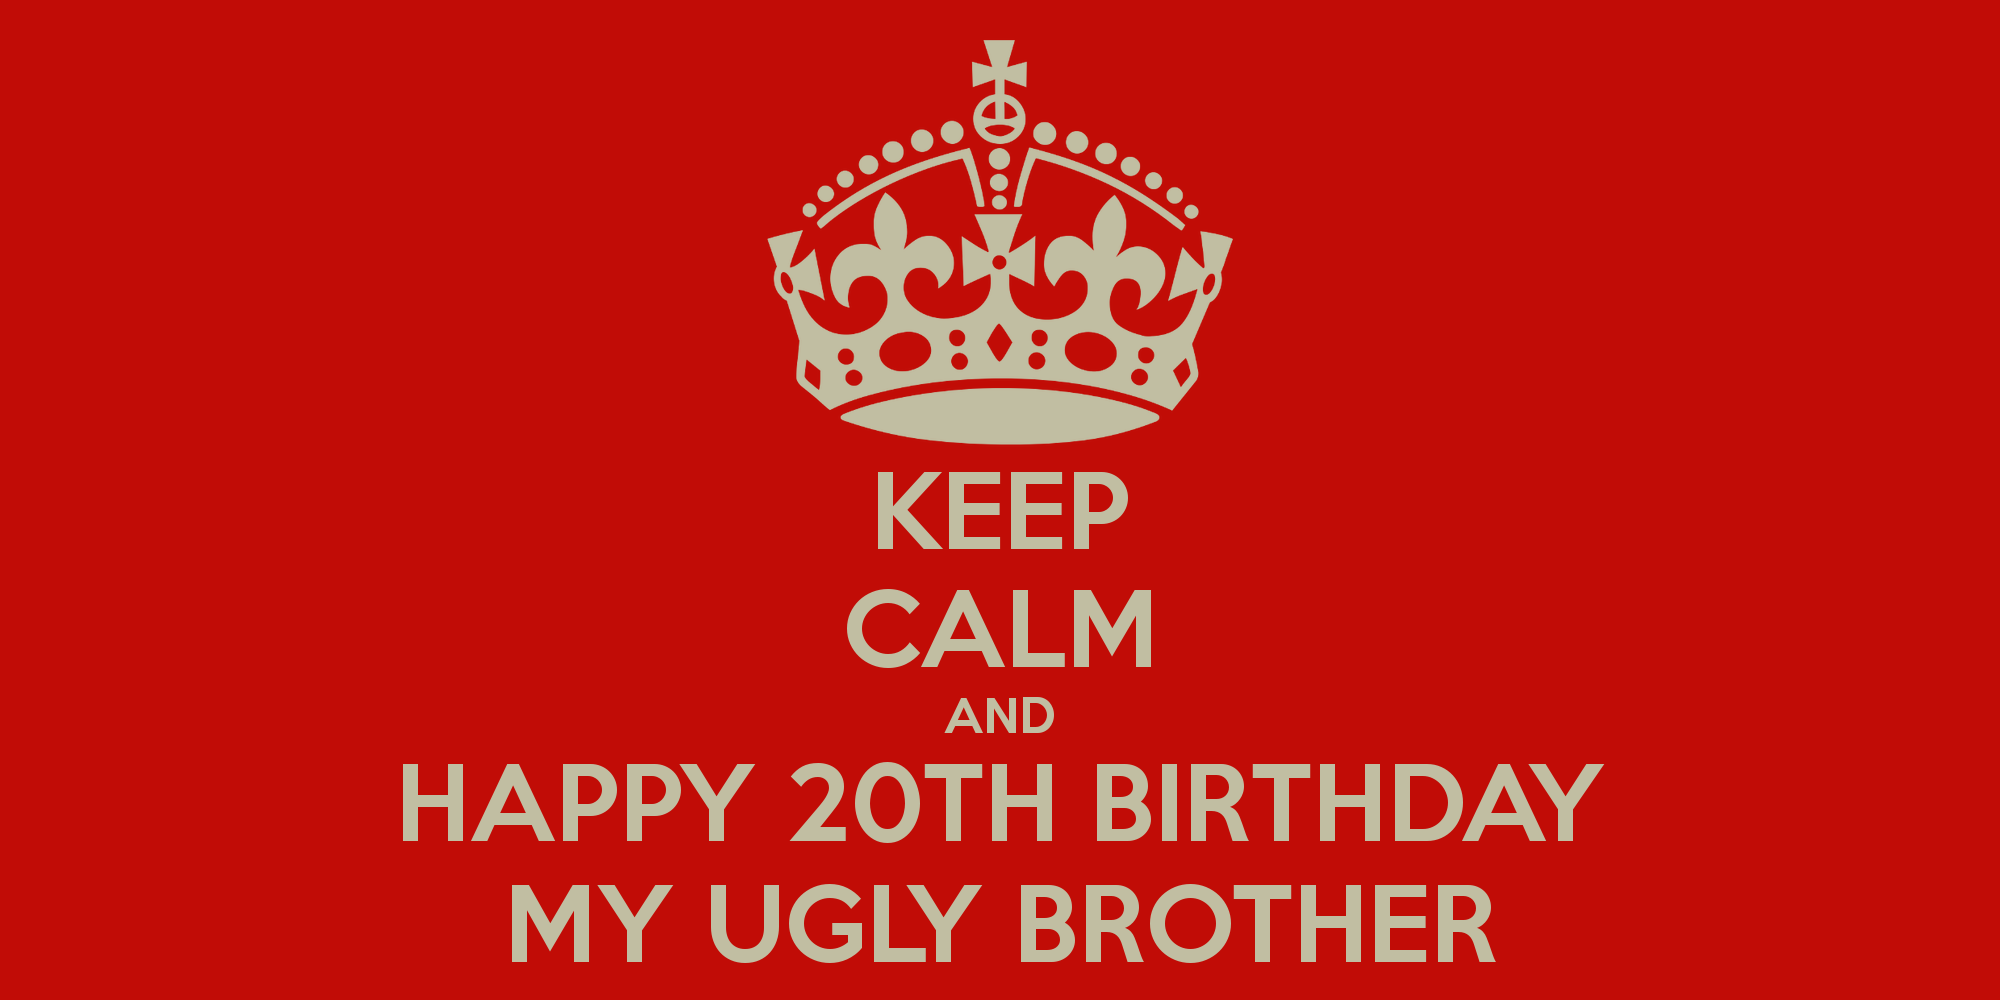 Happy 20th Birthday Keep Calm The Best Collection of Quotes